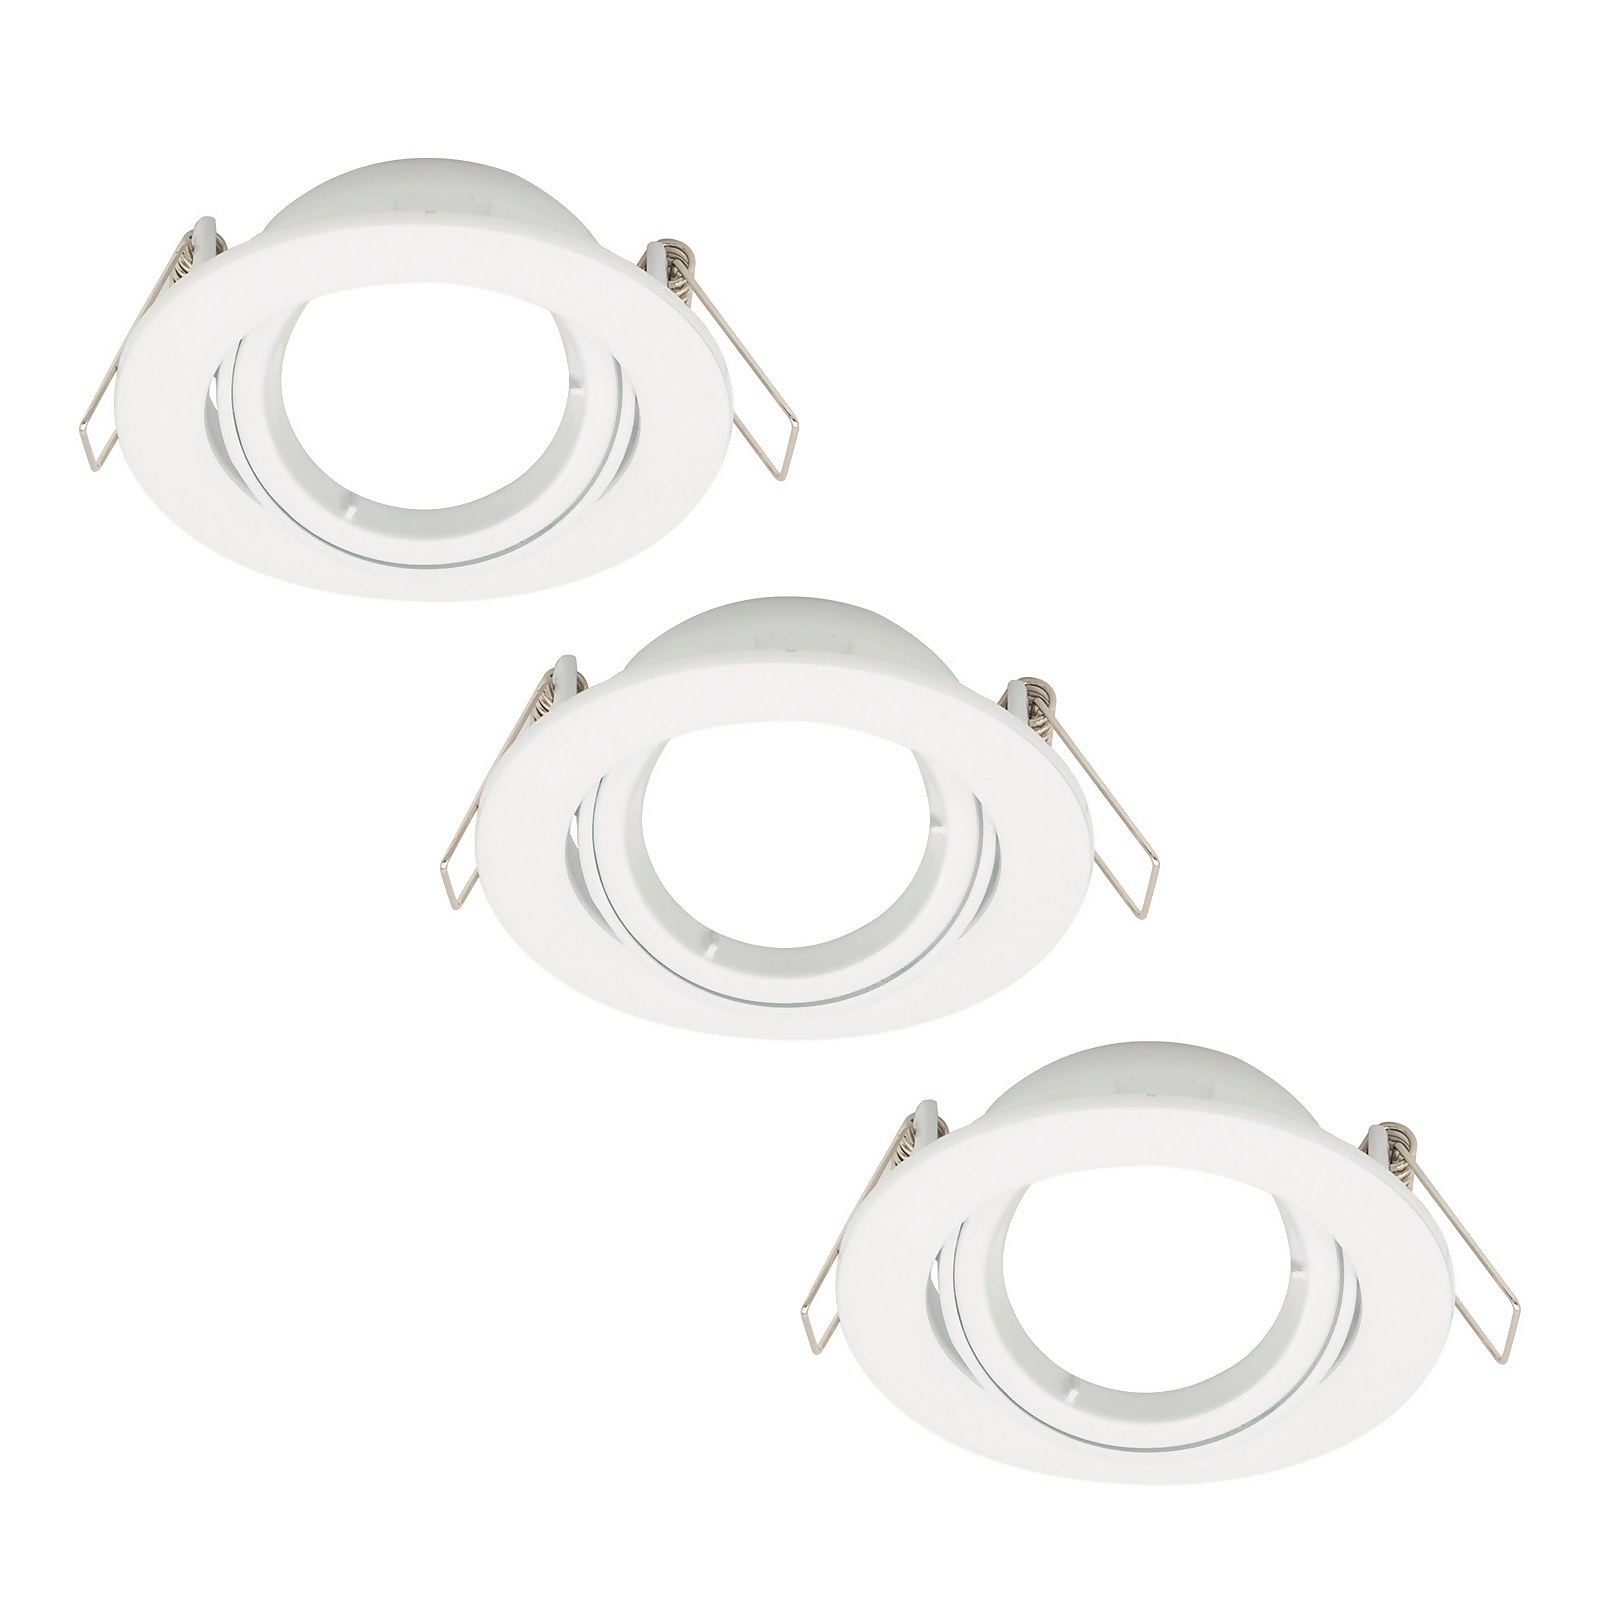 Photo of 3 Pack Adjustable Downlights - White Finish